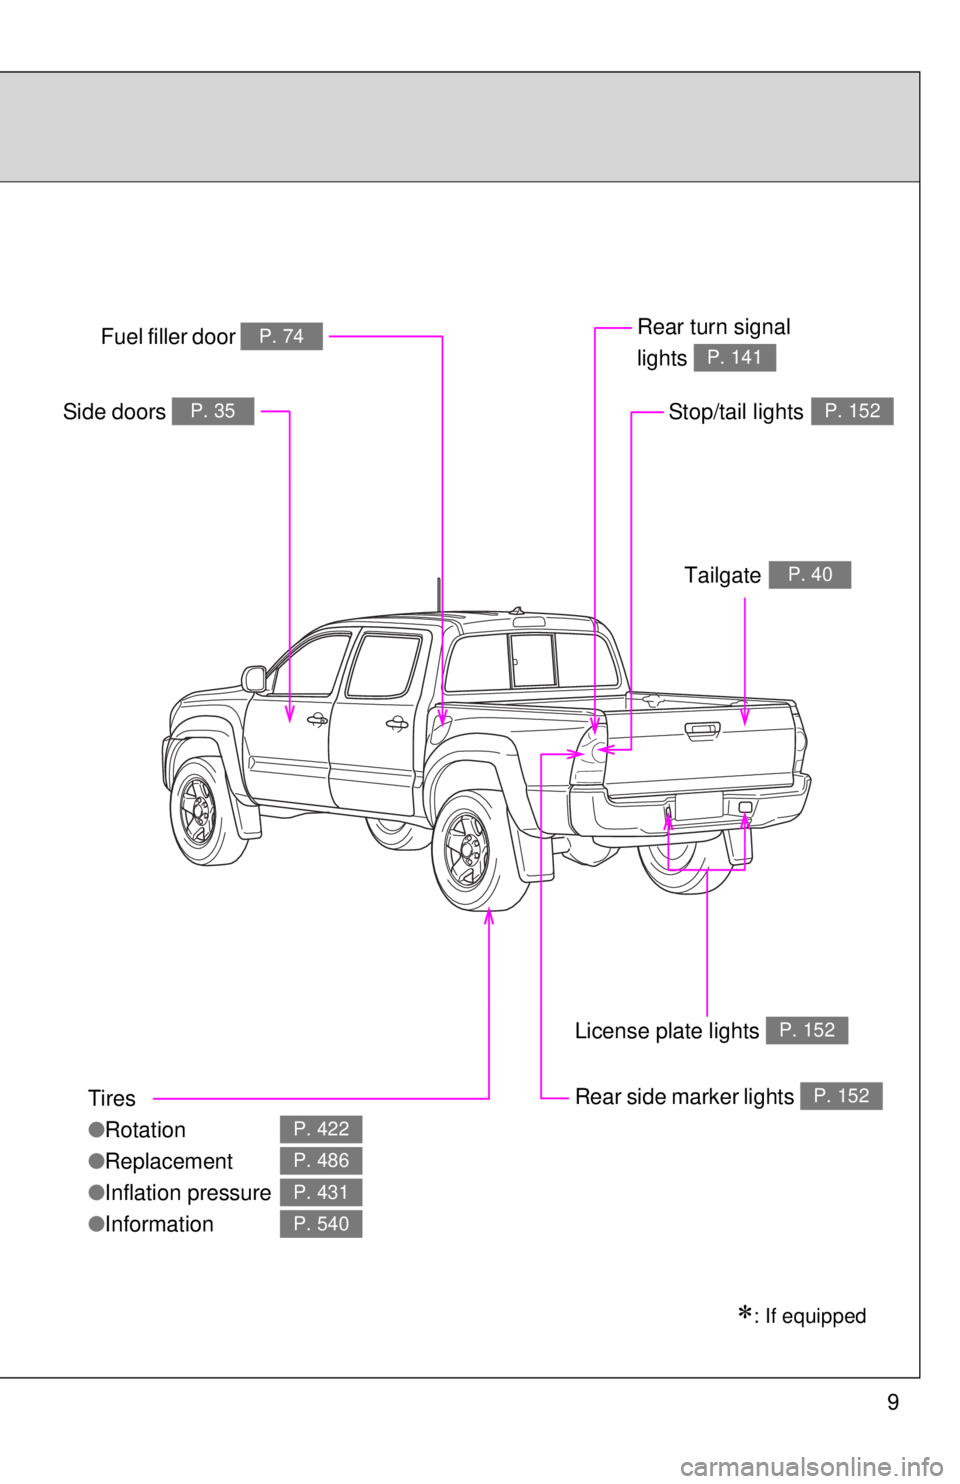 TOYOTA TACOMA 2015  Owners Manual (in English) 9
Tires
●Rotation
● Replacement
● Inflation pressure
● Information
P. 422
P. 486
P. 431
P. 540
Fuel filler door P. 74Rear turn signal 
lights 
P. 141
Rear side marker lightsP. 152
Side door